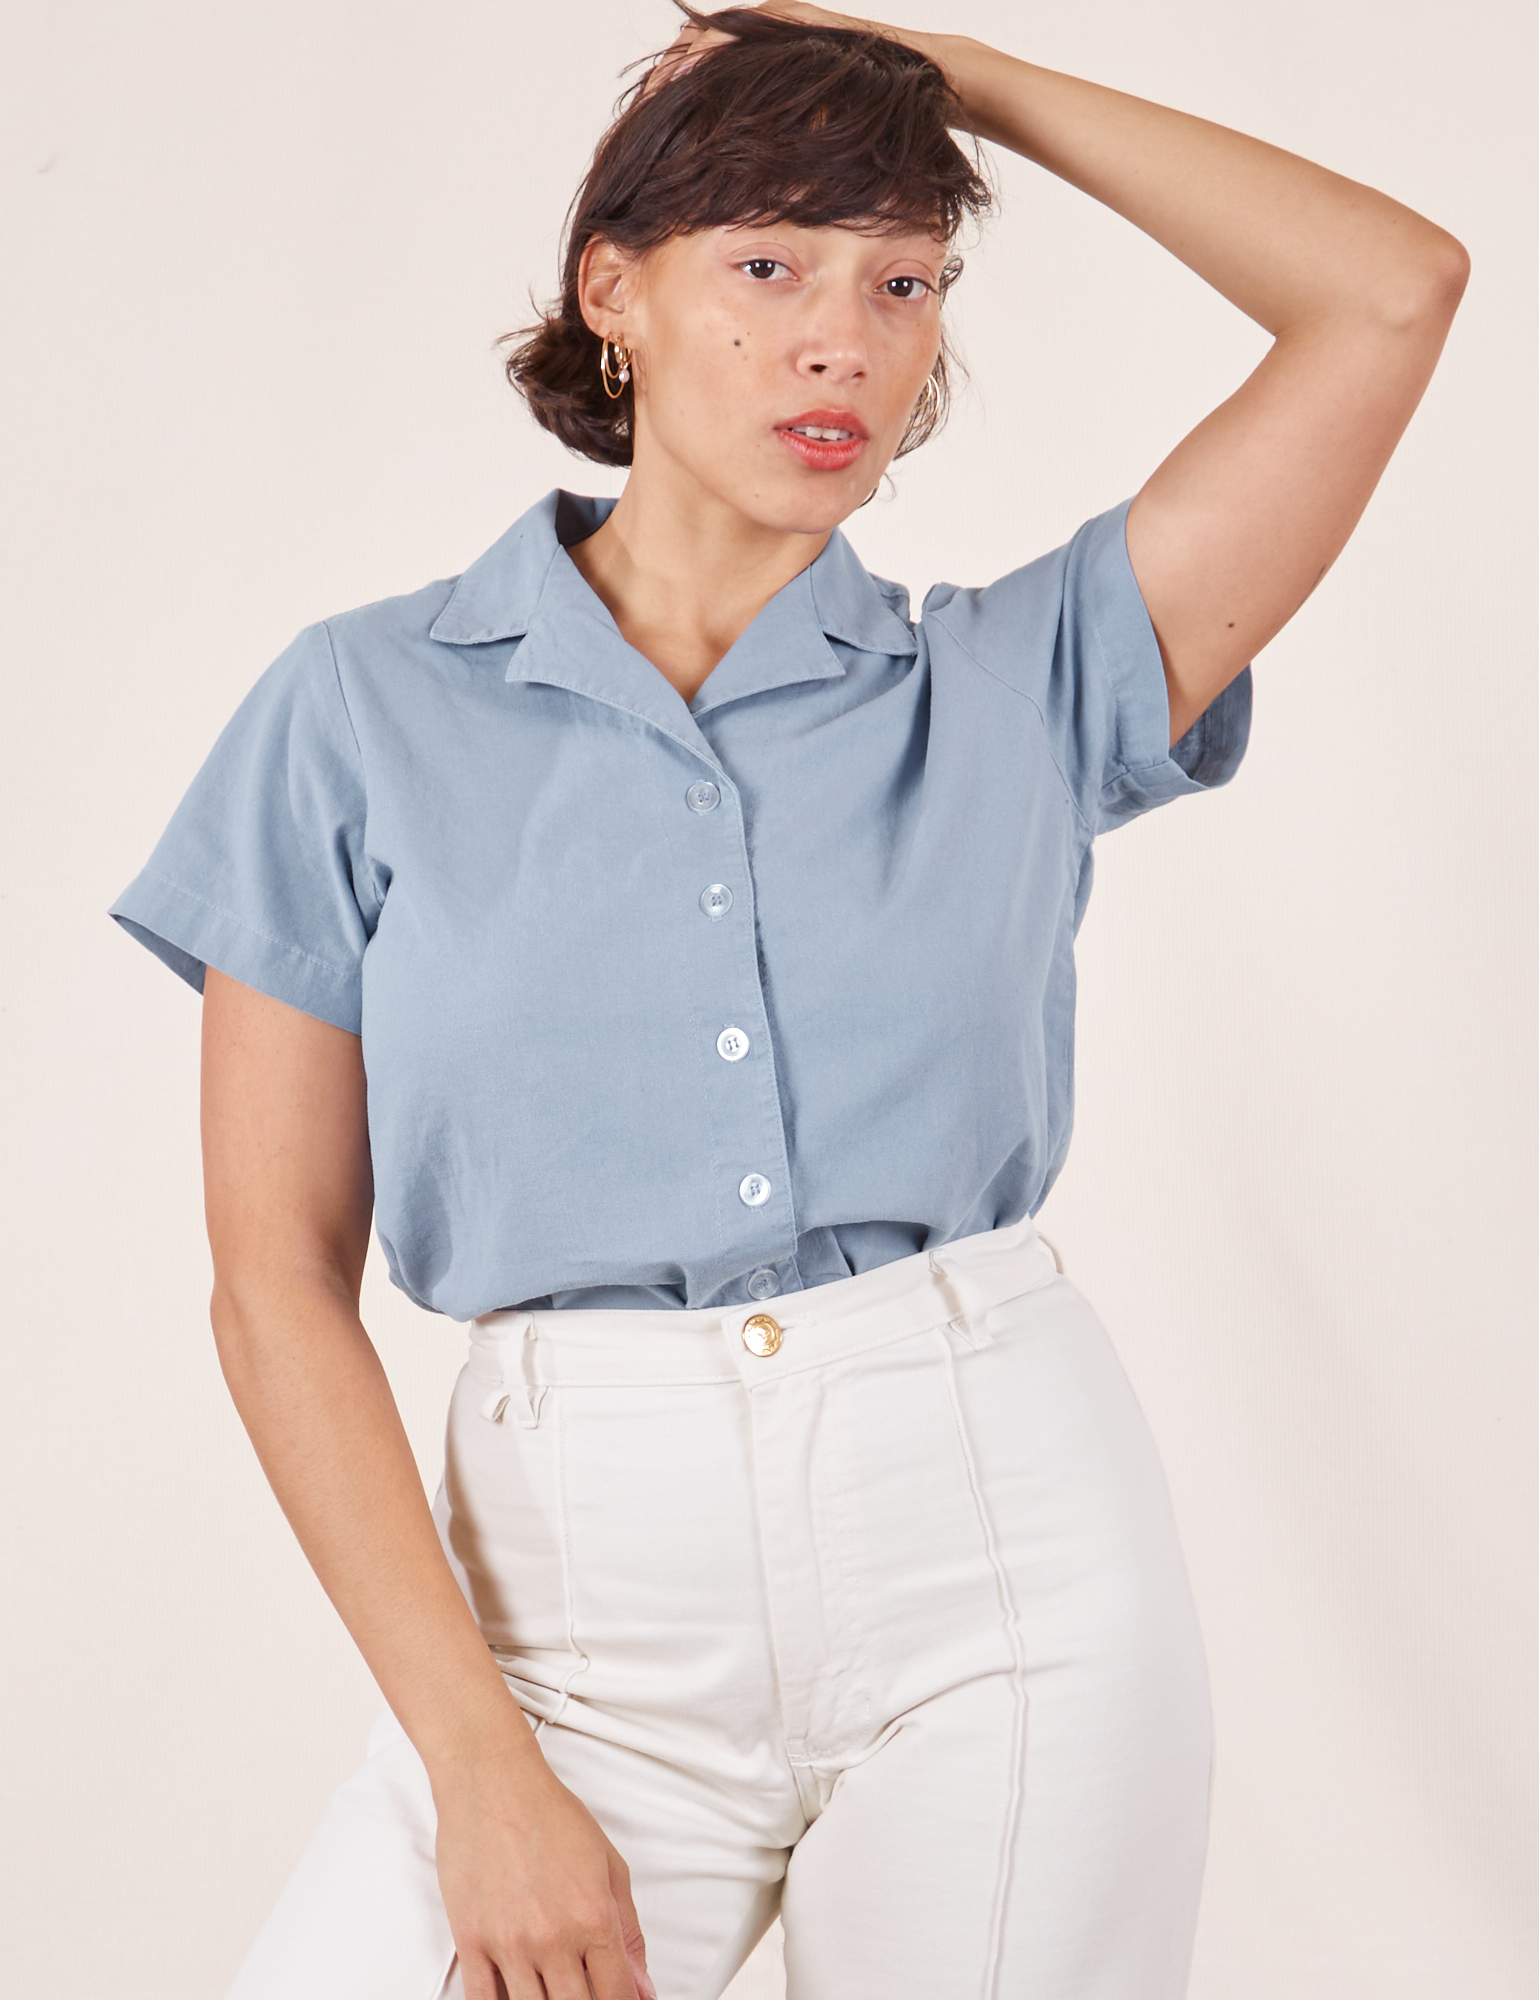 Tiara is 5&#39;4&quot; and wearing XS Pantry Button-Up in Periwinkle